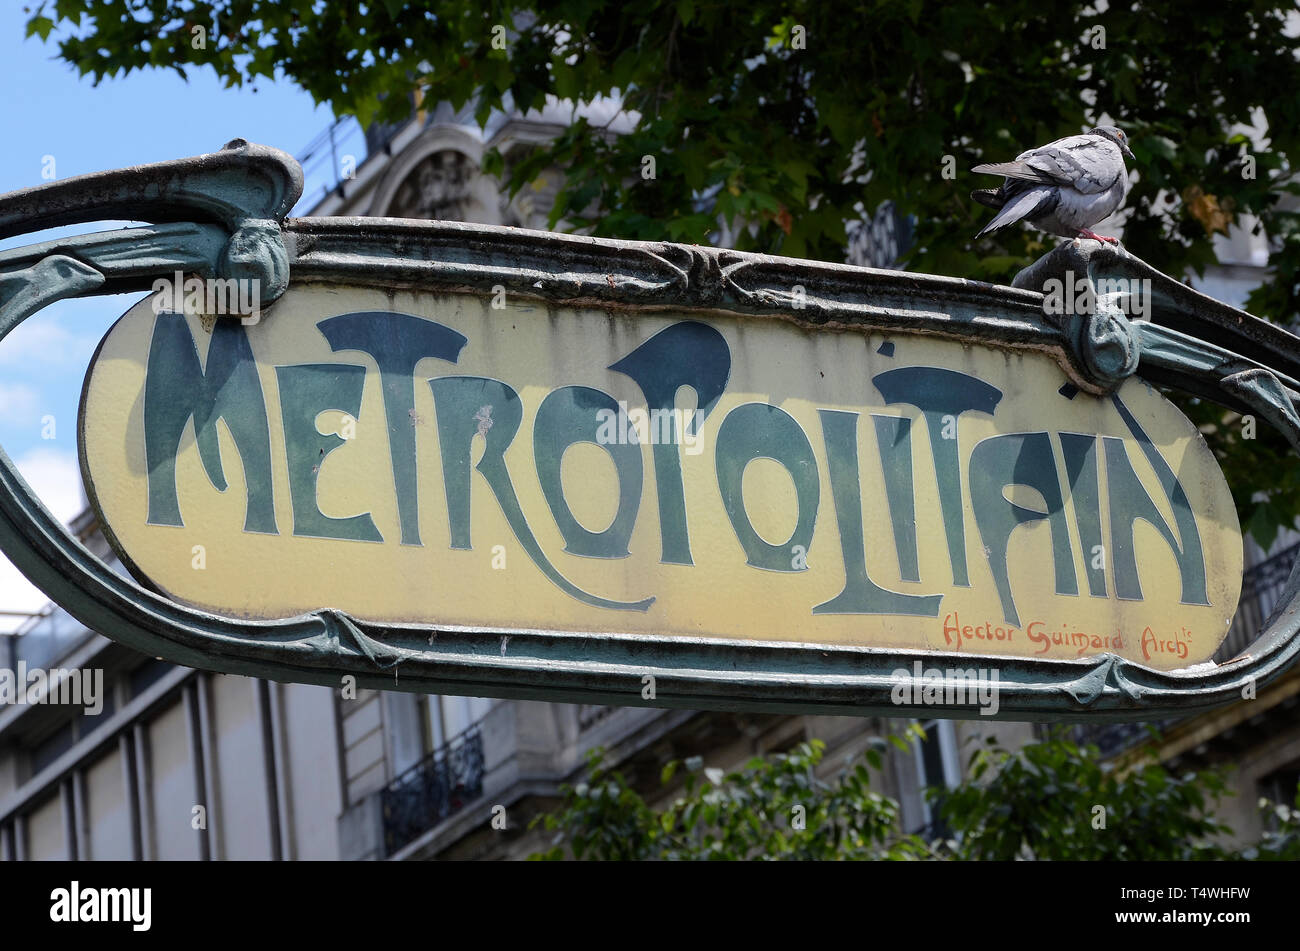 Metropolitain Paris Metro vintage sign in Paris, France, Europe. Hector Guimard Arch design writing. Classic French landmark design with pigeon Stock Photo